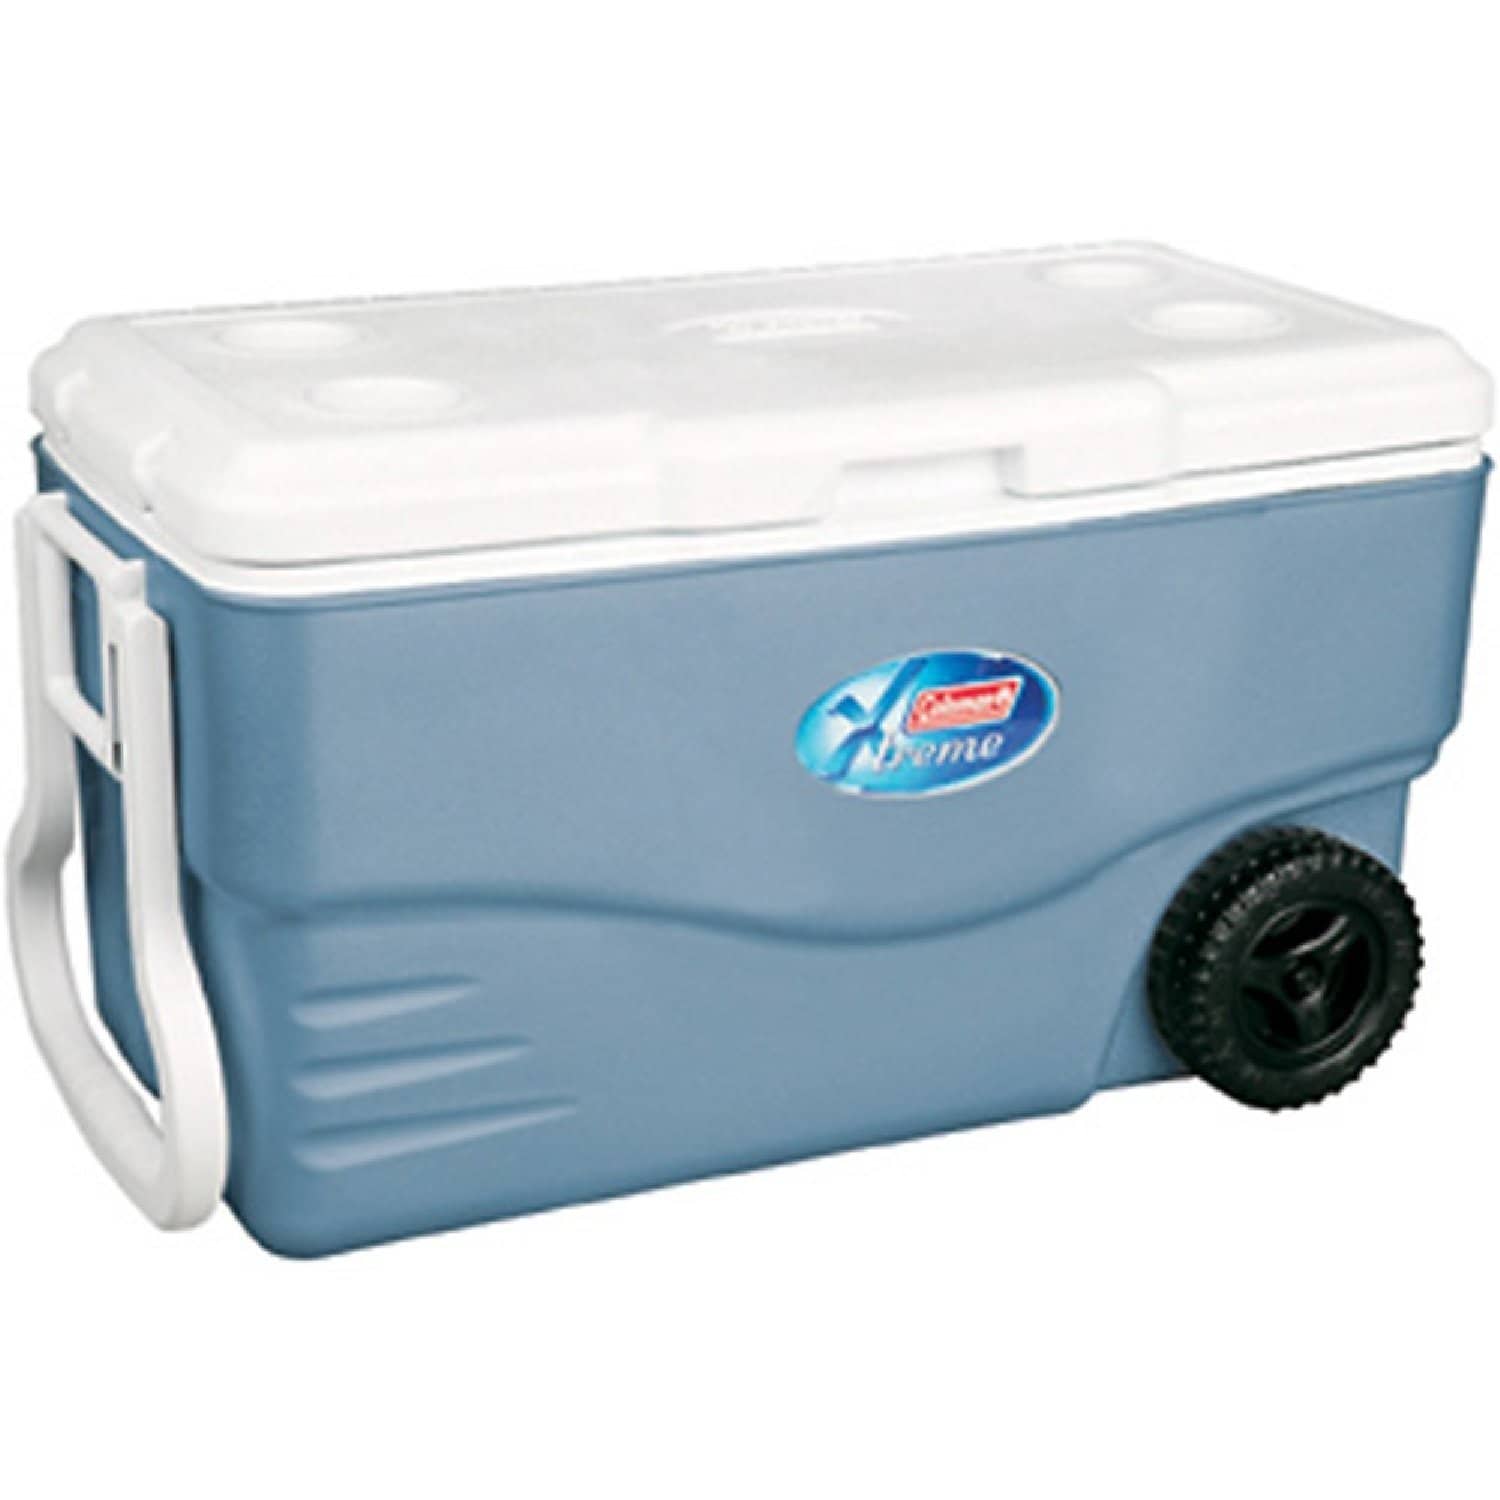 10 Best Camping Coolers